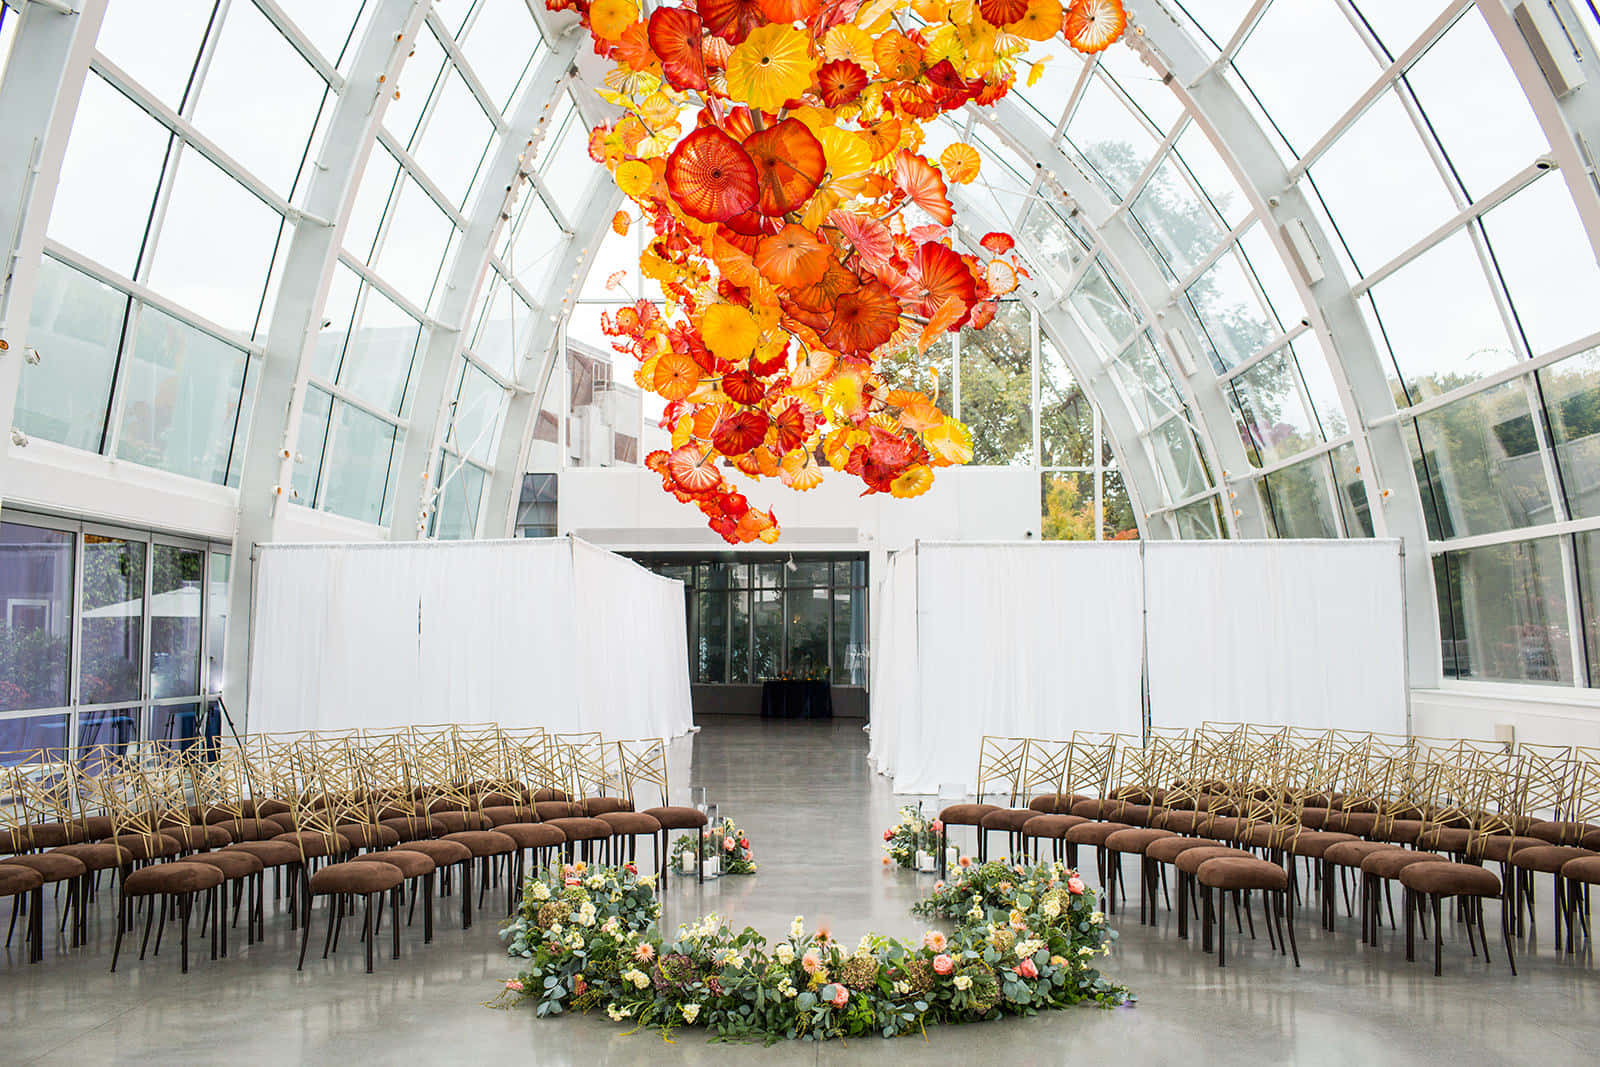 Chihuly Glass Flowers Ceiling Event Space Wallpaper